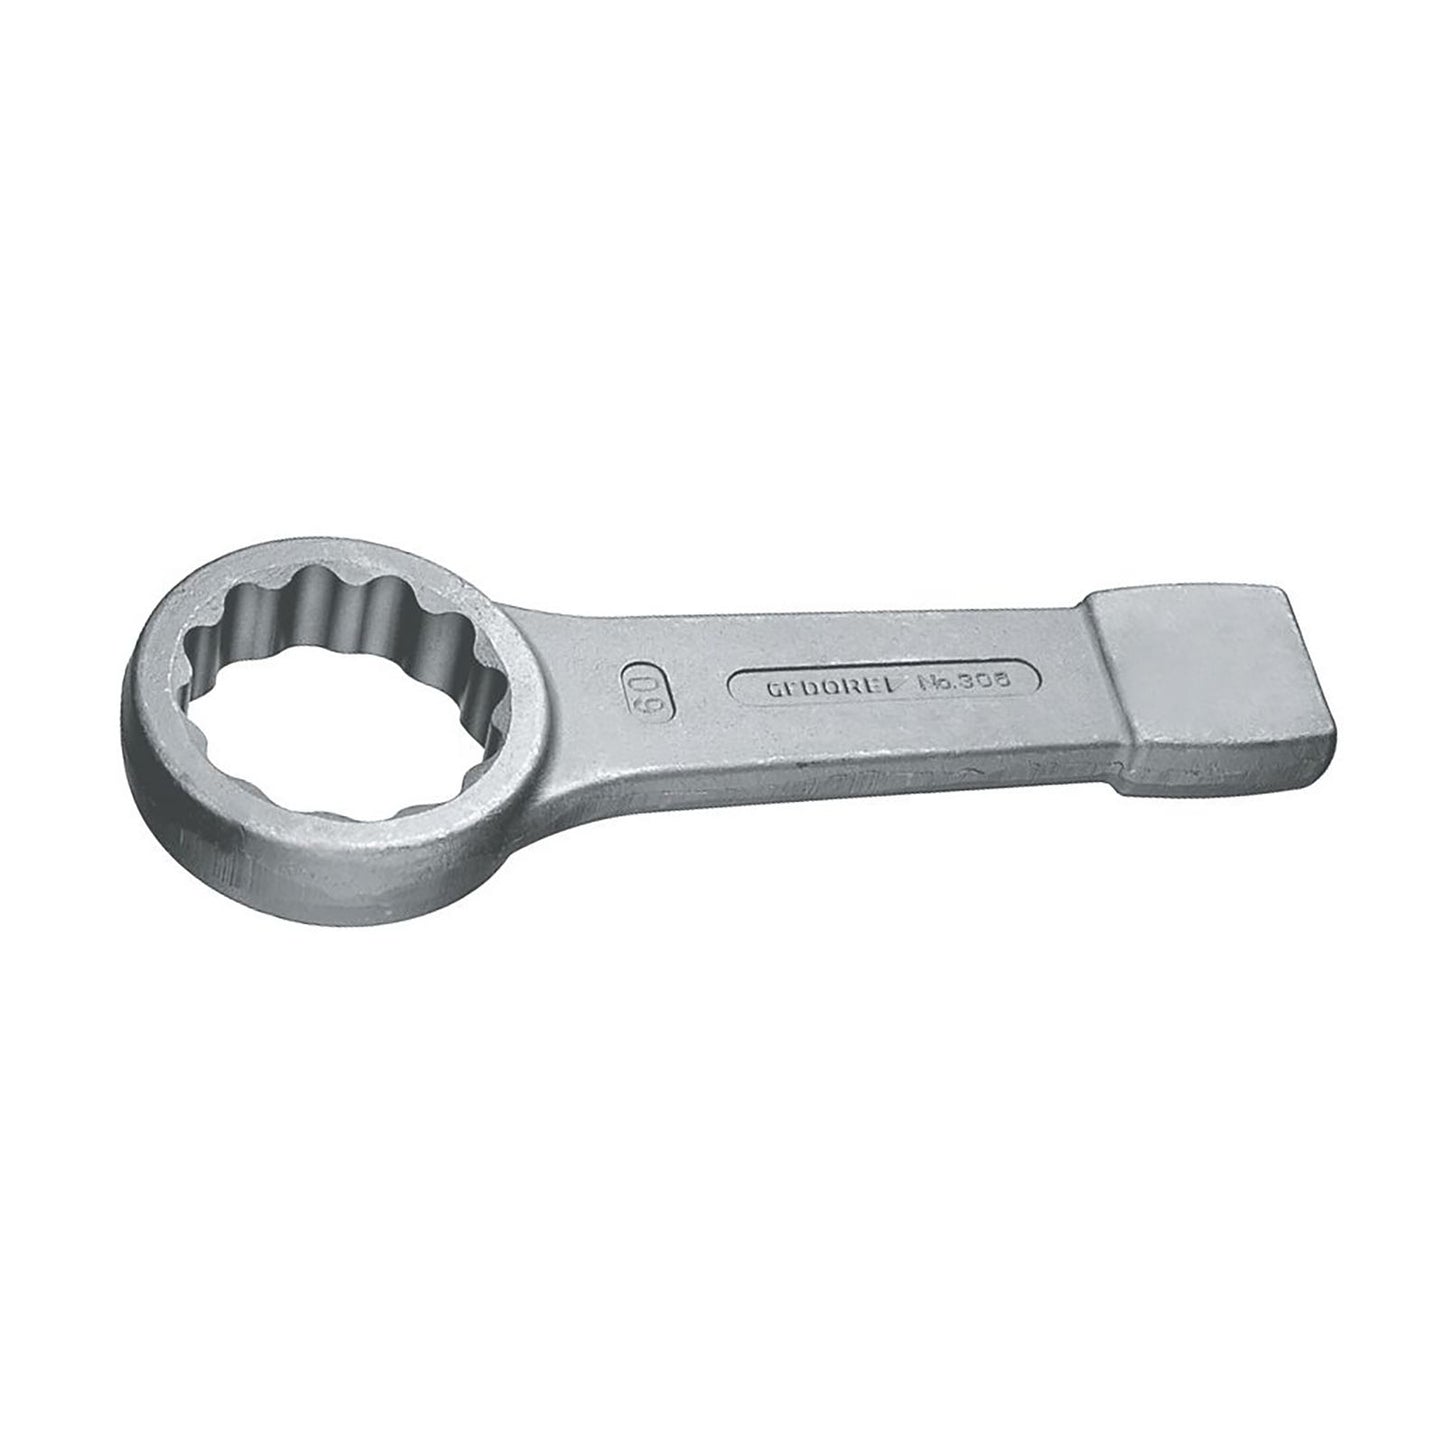 GEDORE 306 90 - Closed Strike Wrench, 90mm (6476670)